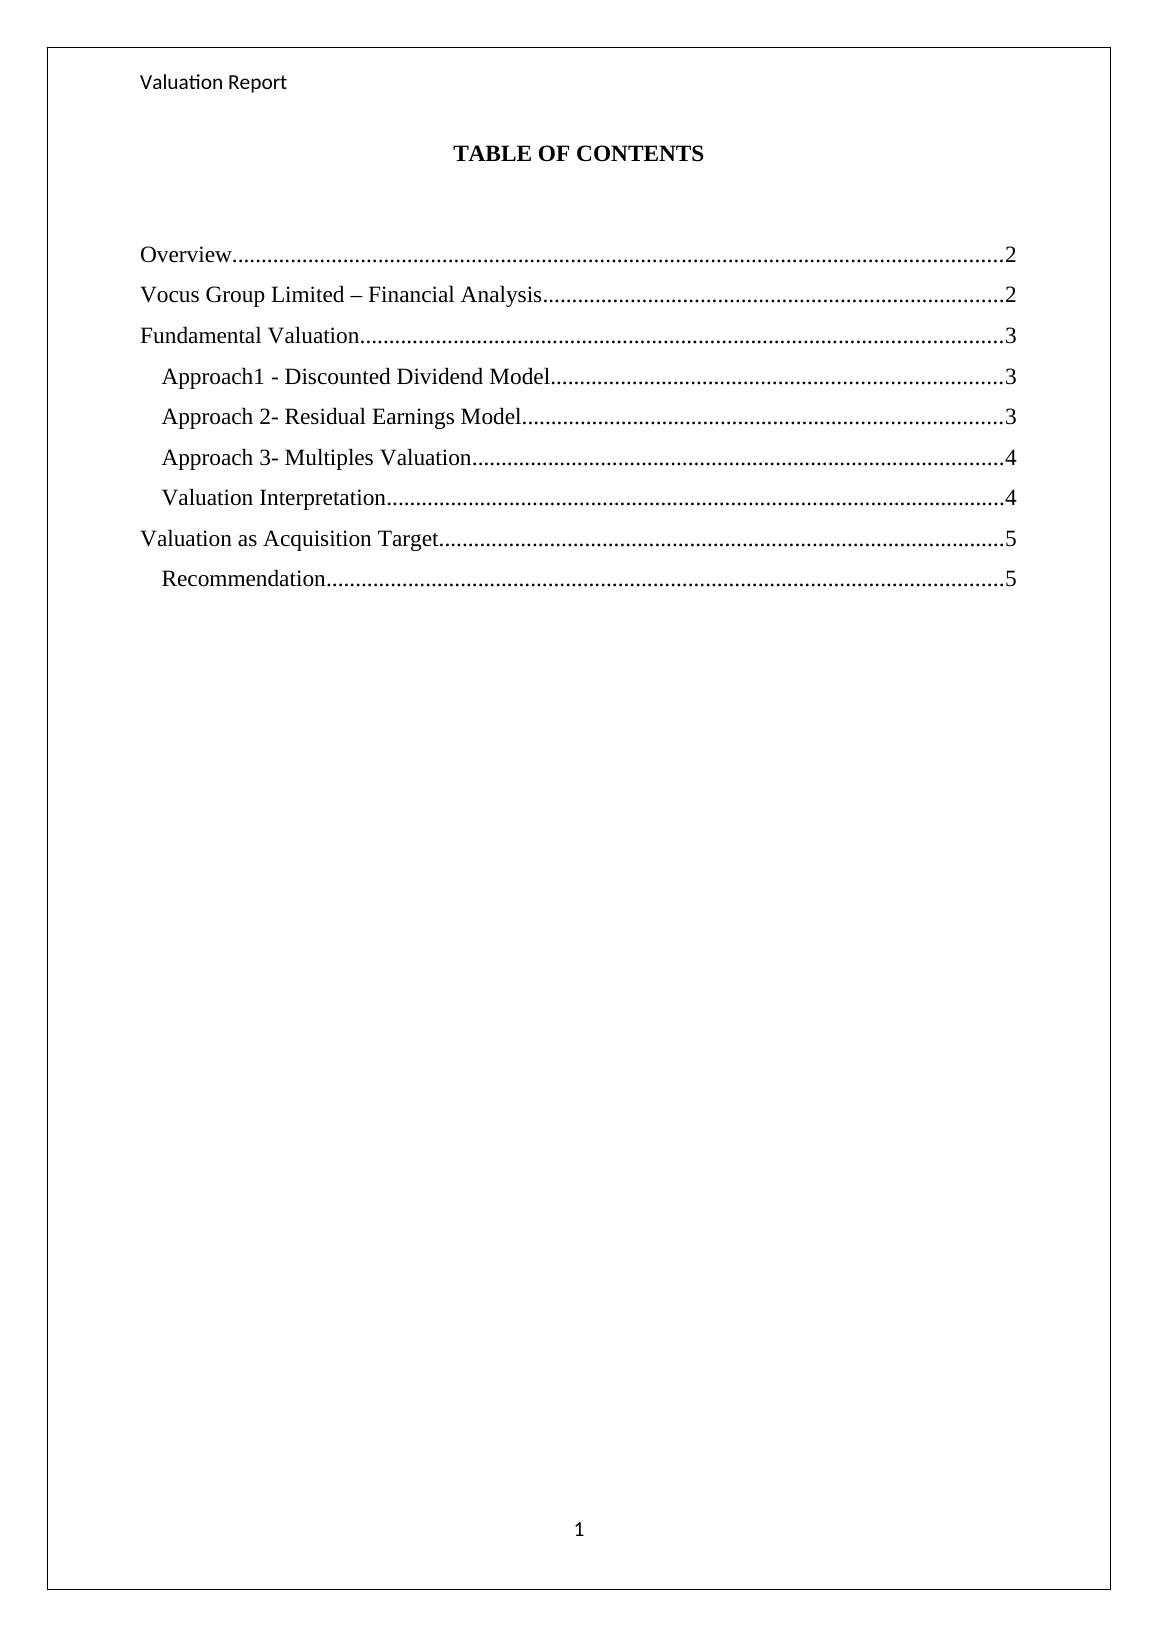 Financial Analysis Assignment - Vocus Group Limited_2